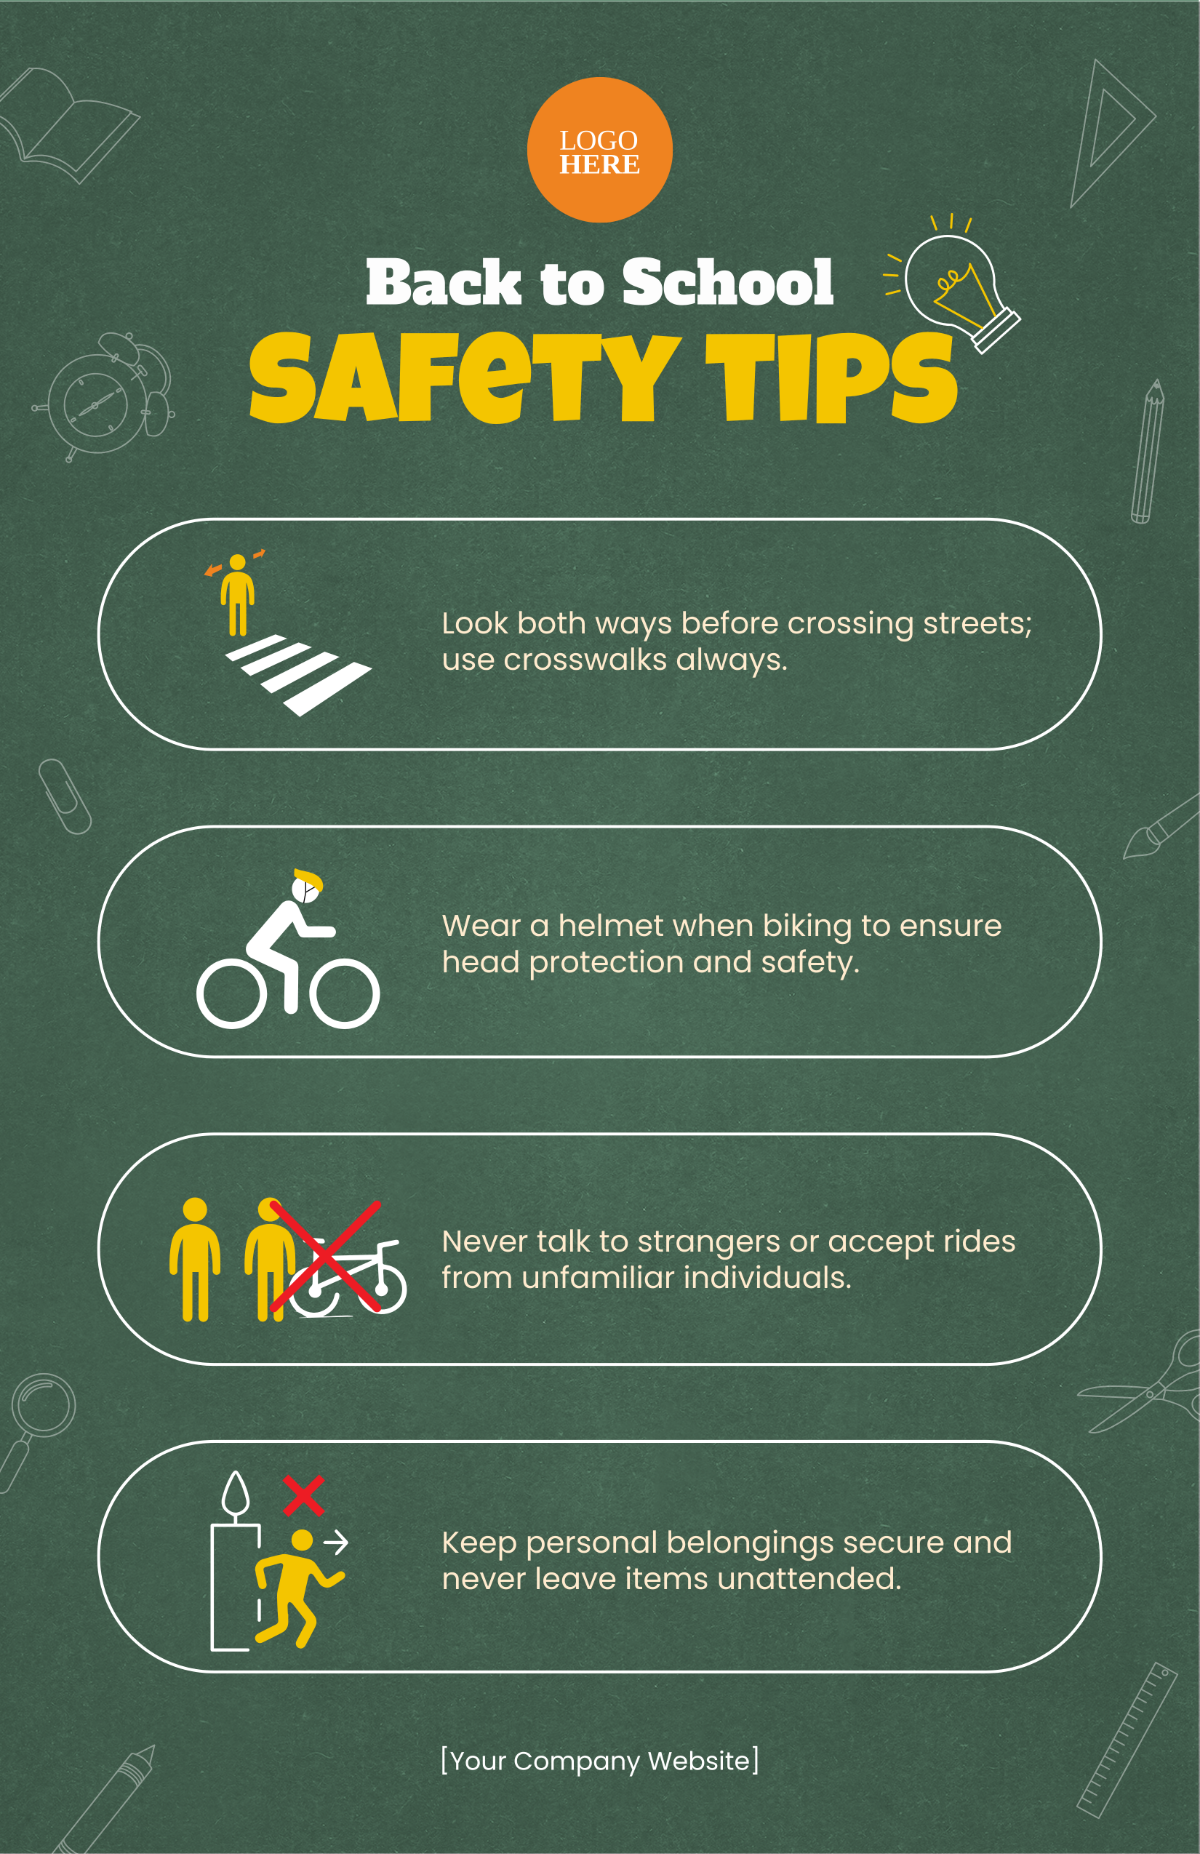 Back to School Safety Poster